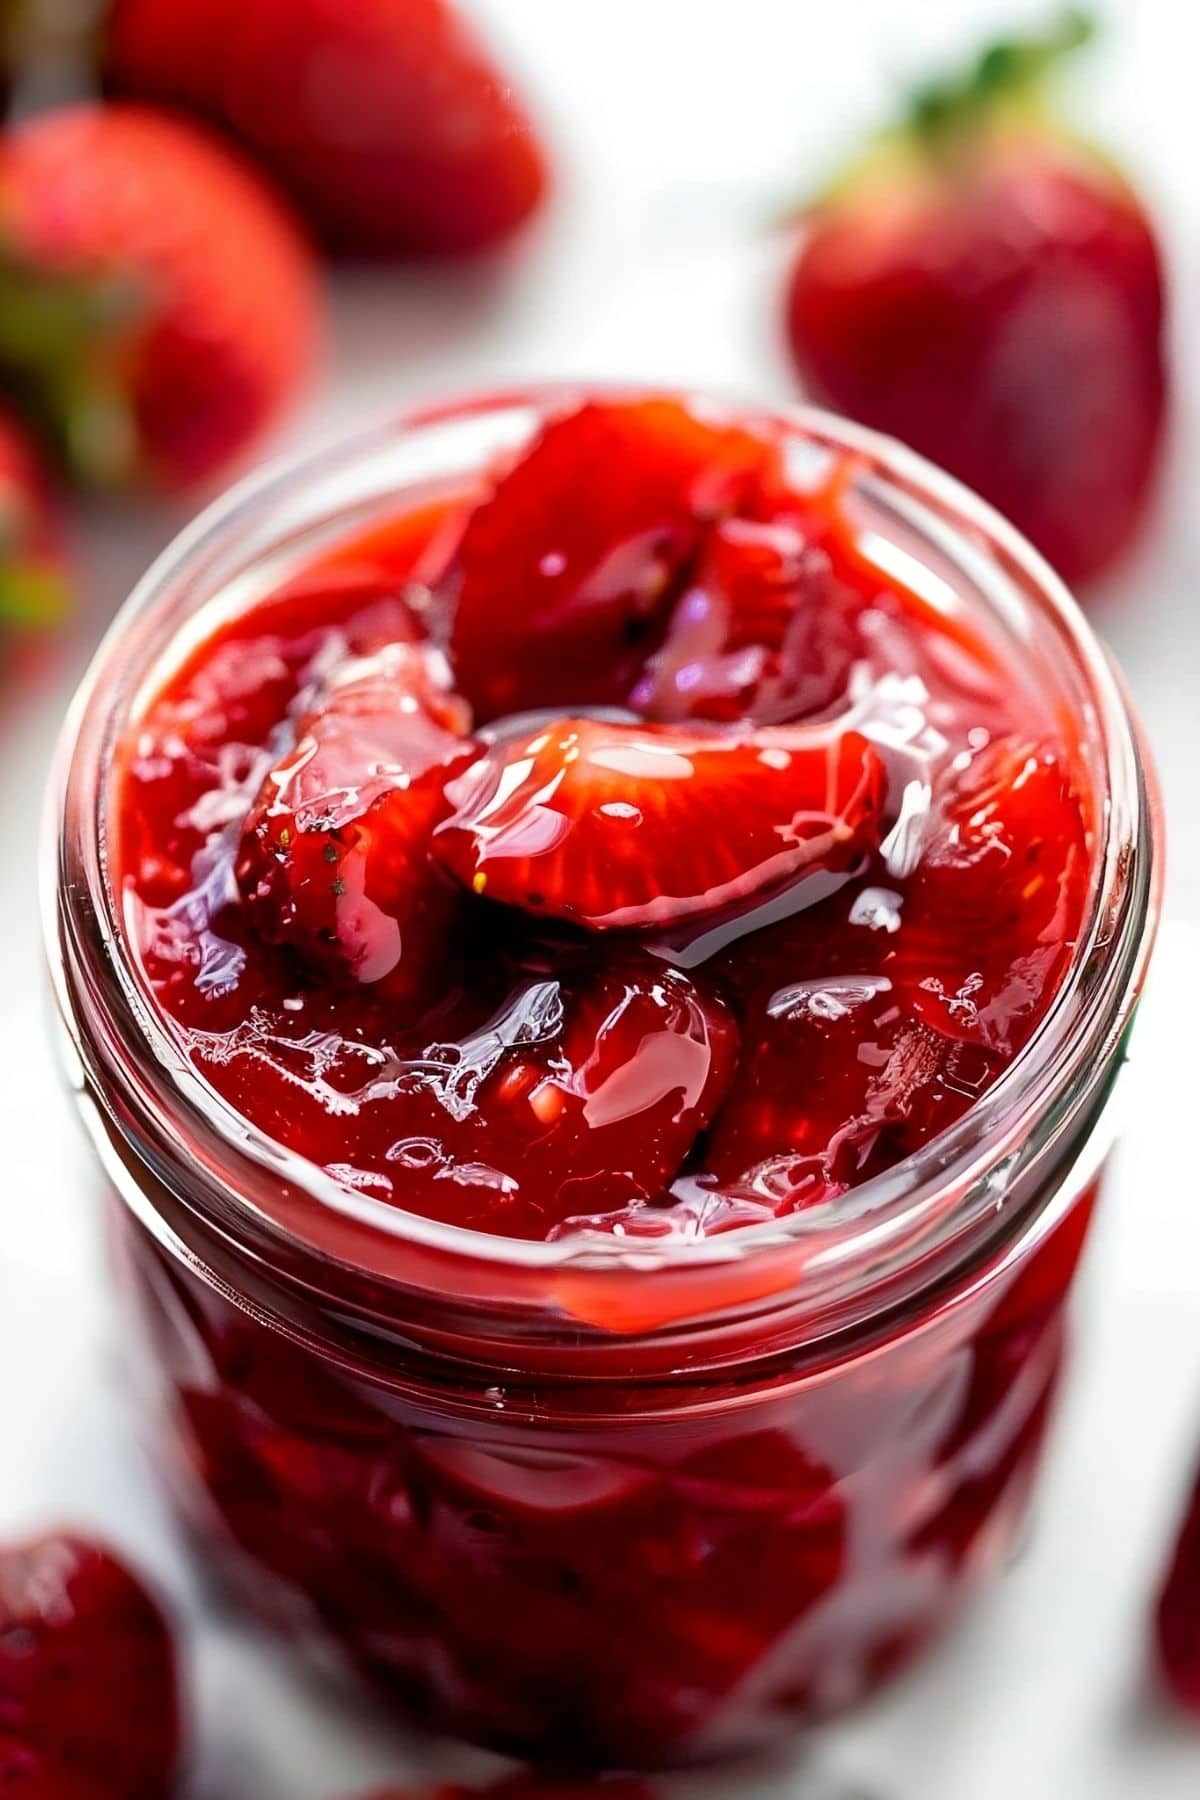 Super Close Up of Top of Jar of Strawberry Glaze with More Strawberries in the Background